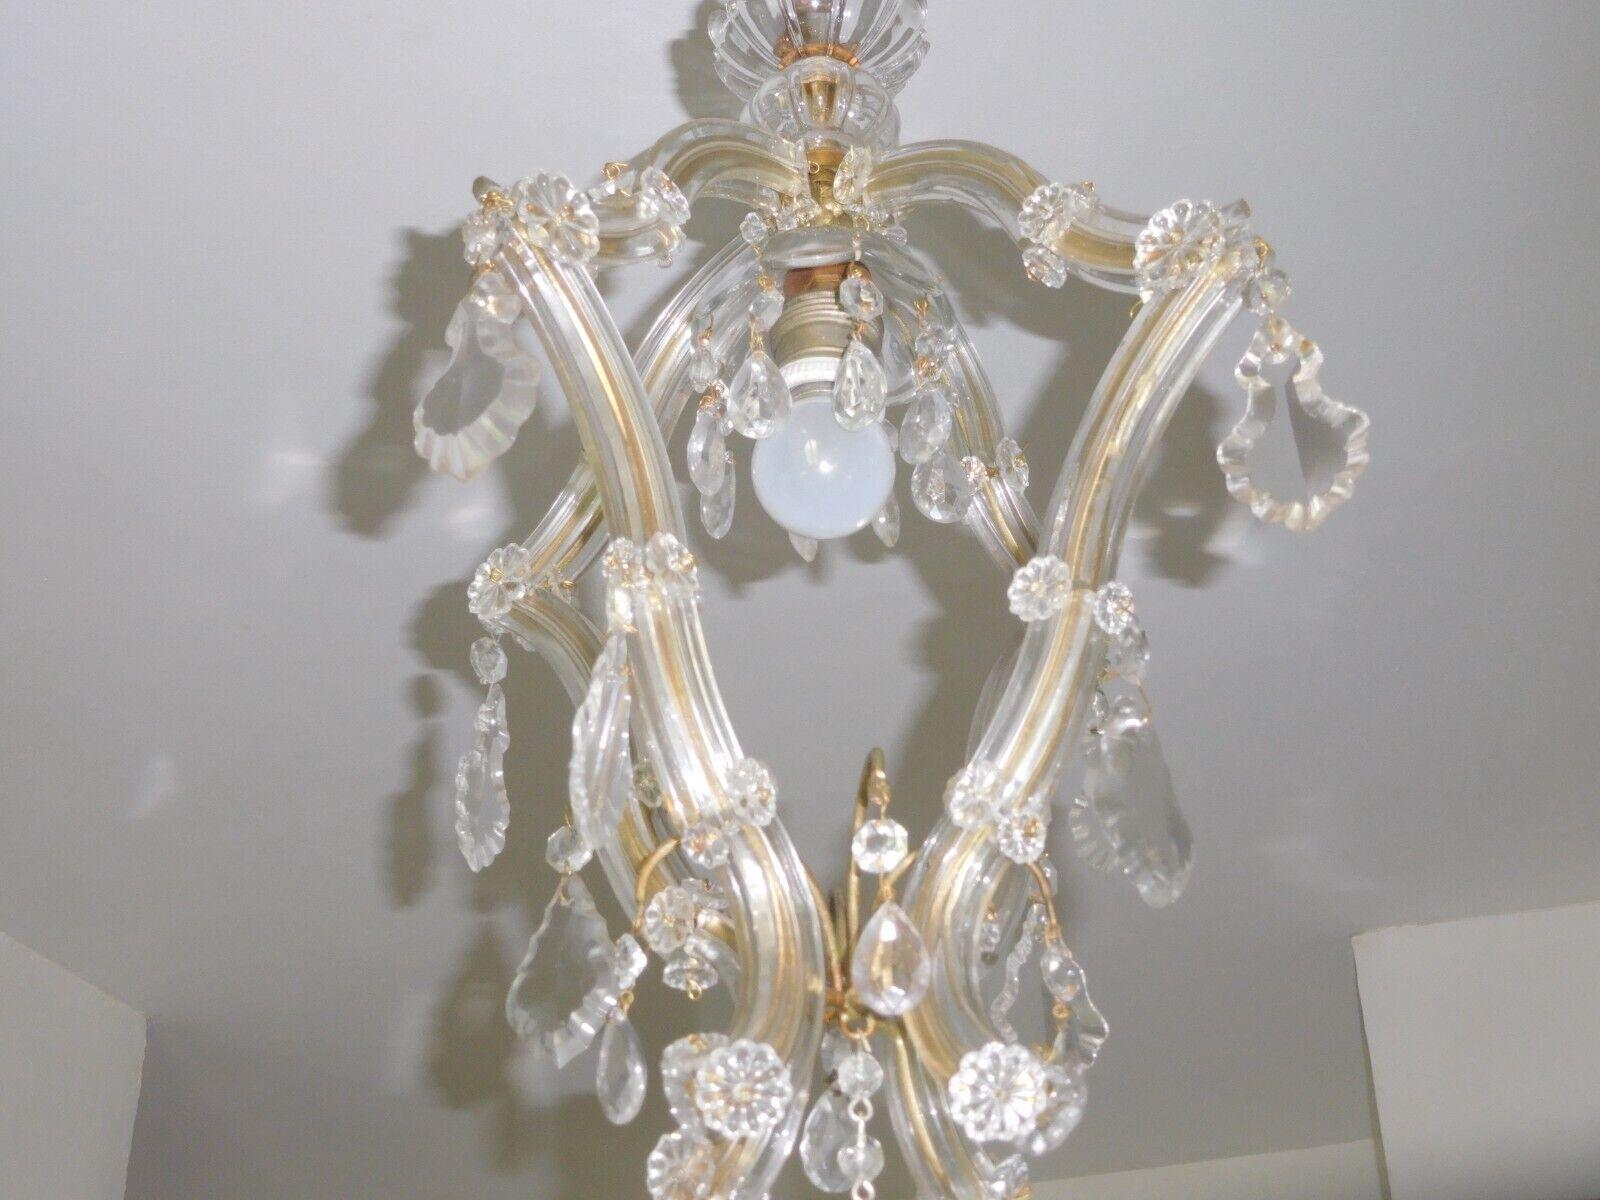 1960's Hollywood Regency style Murano Art Glass Ceiling Lantern From Italy For Sale 2